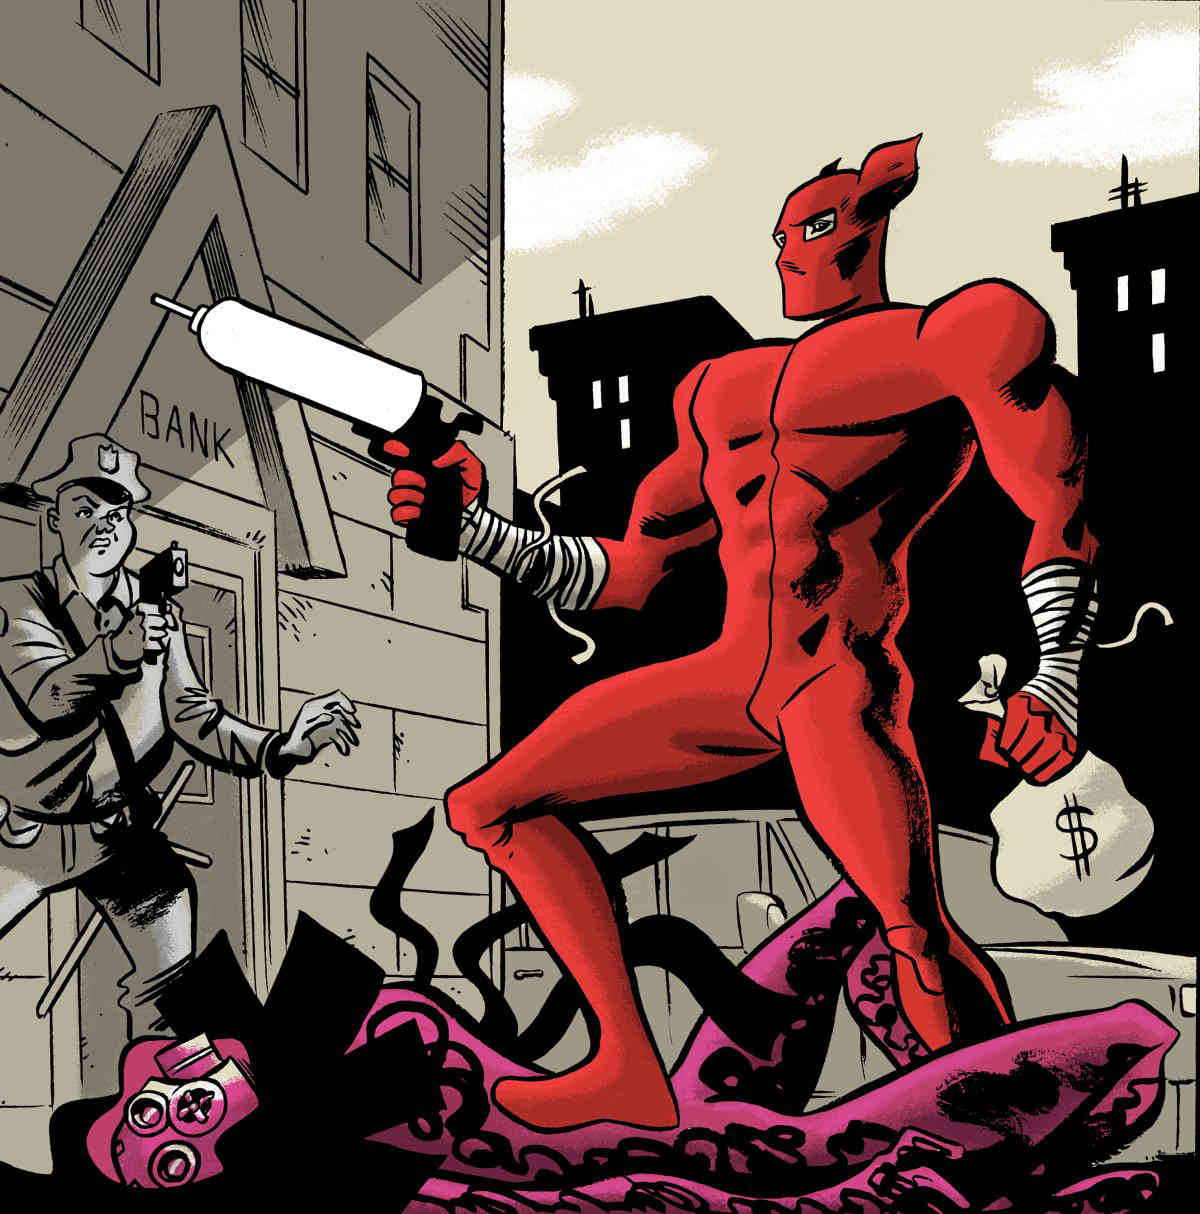 Preview: Dean Haspiel Goes on Tour for The Red Hook, Vol. 1: New Brooklyn